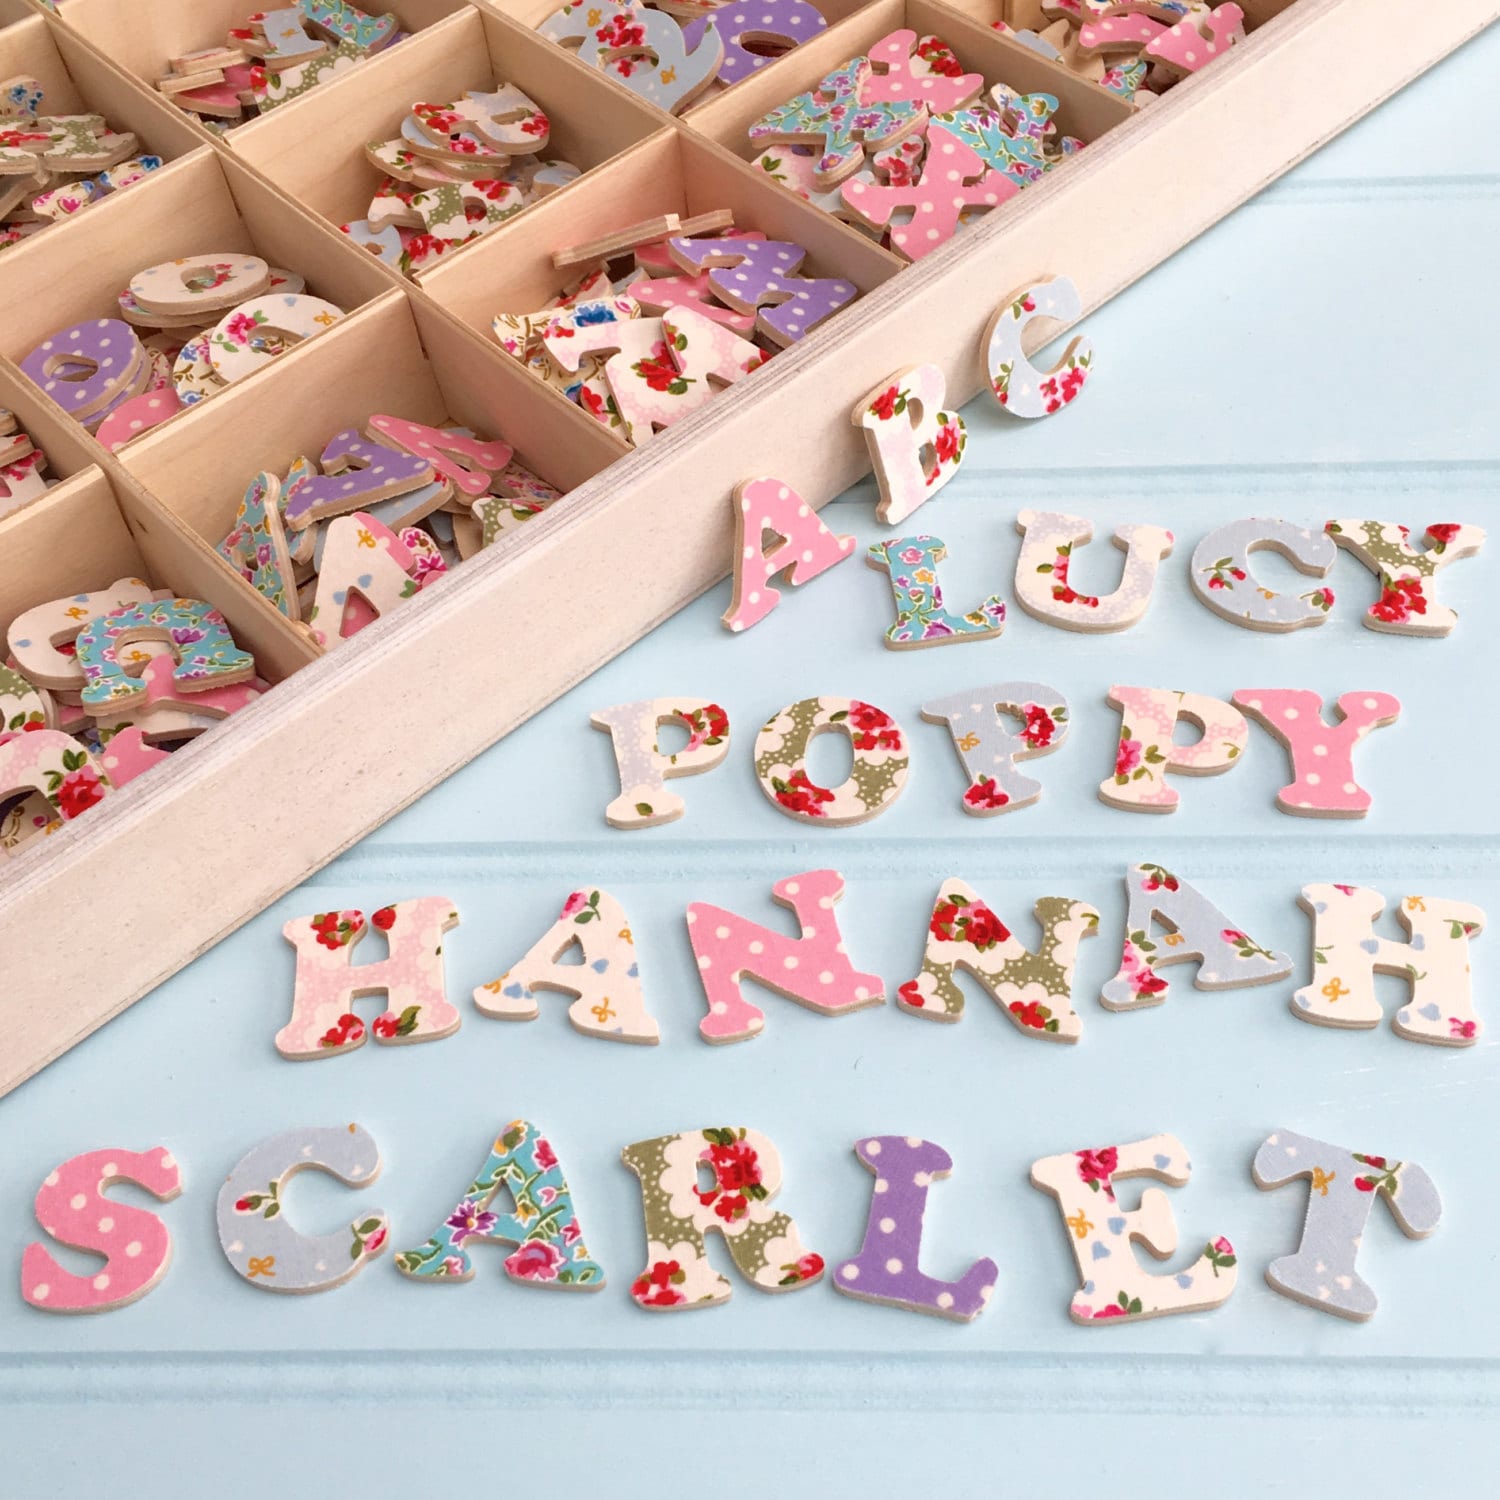 Alphabet Stamp Set with Wooden Box in Vintage Style, Lower Case Lette, MiniatureSweet, Kawaii Resin Crafts, Decoden Cabochons Supplies